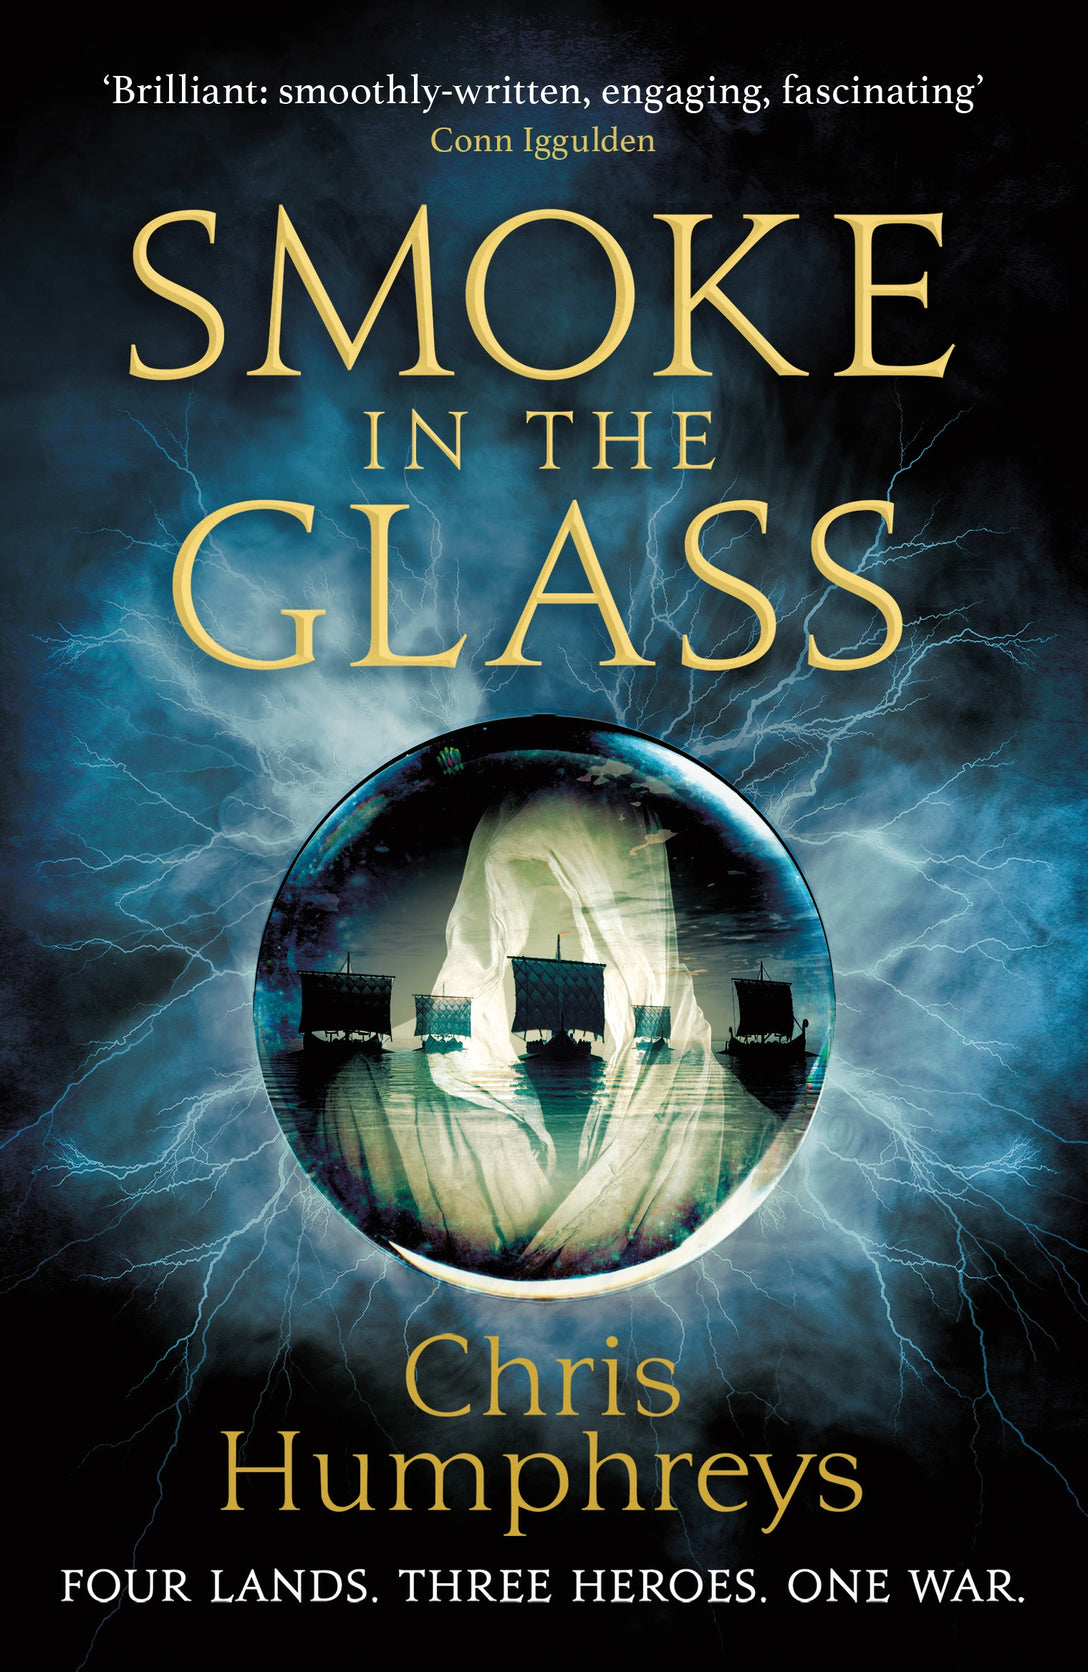 Smoke in the Glass by Chris Humphreys